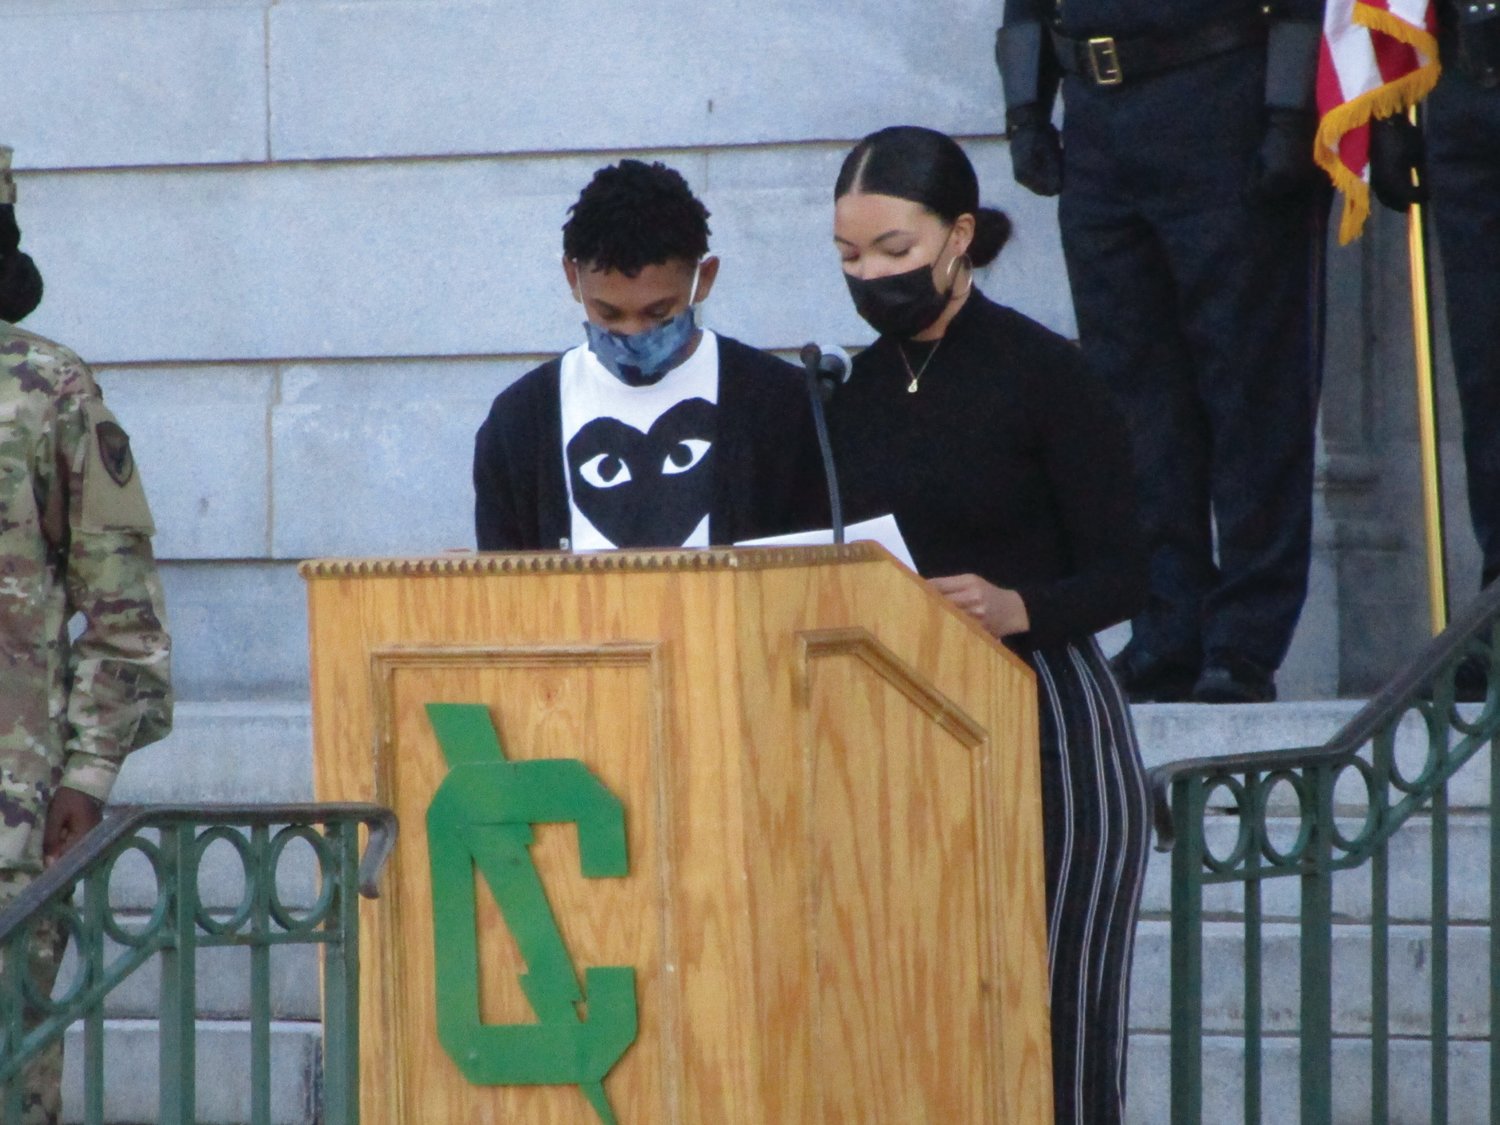 FROM THE HEART: Cranston East students Dashira Agramonte Diaz and Karon Ives read a poem during the ceremony.